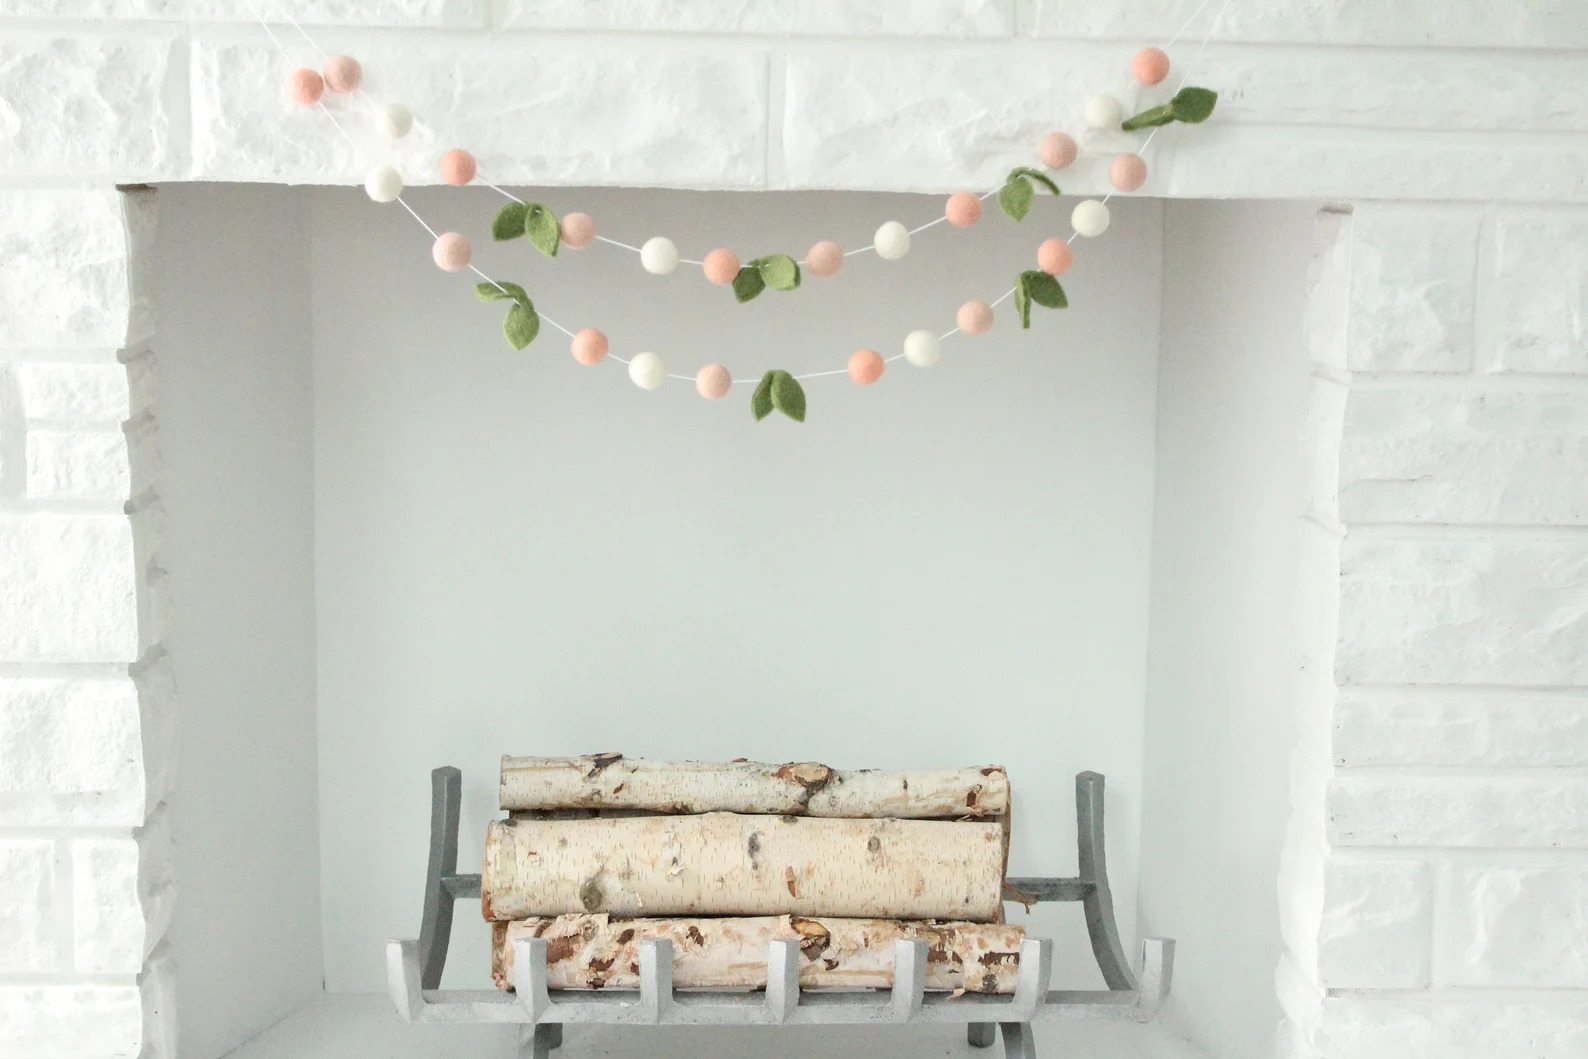 15 Festive Spring Garlands to Celebrate the Season in Style